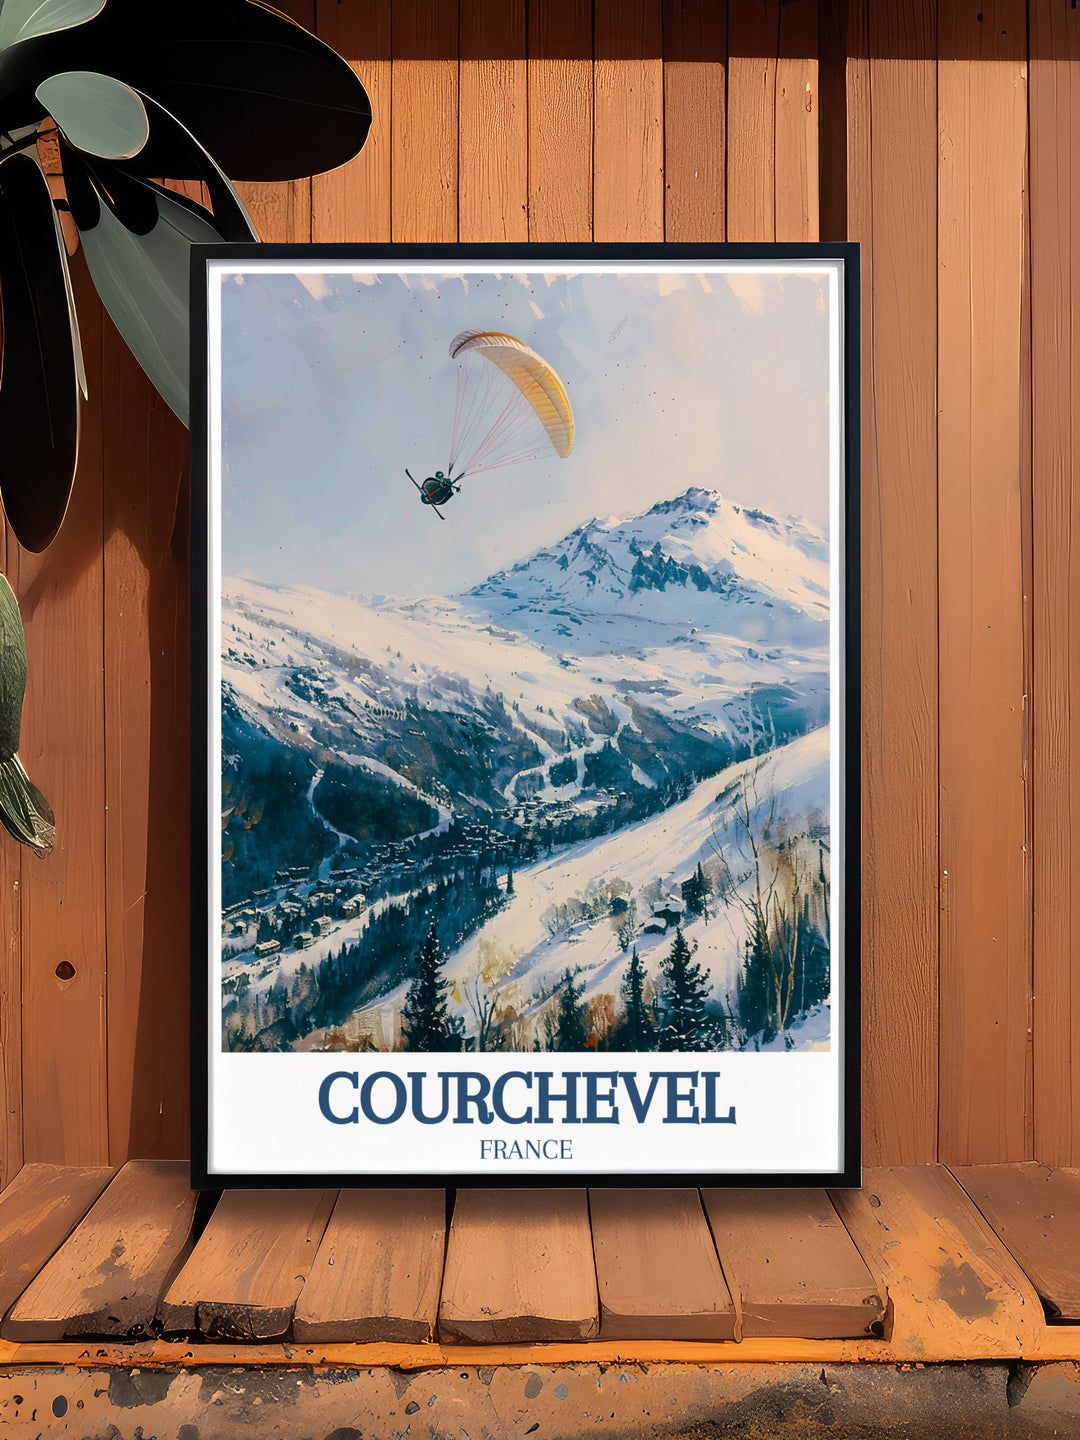 Highlighting the serene vistas of the Alpes du Nord and the vibrant skiing culture of Courchevel, this travel poster is perfect for those who appreciate the scenic and luxurious richness of France.